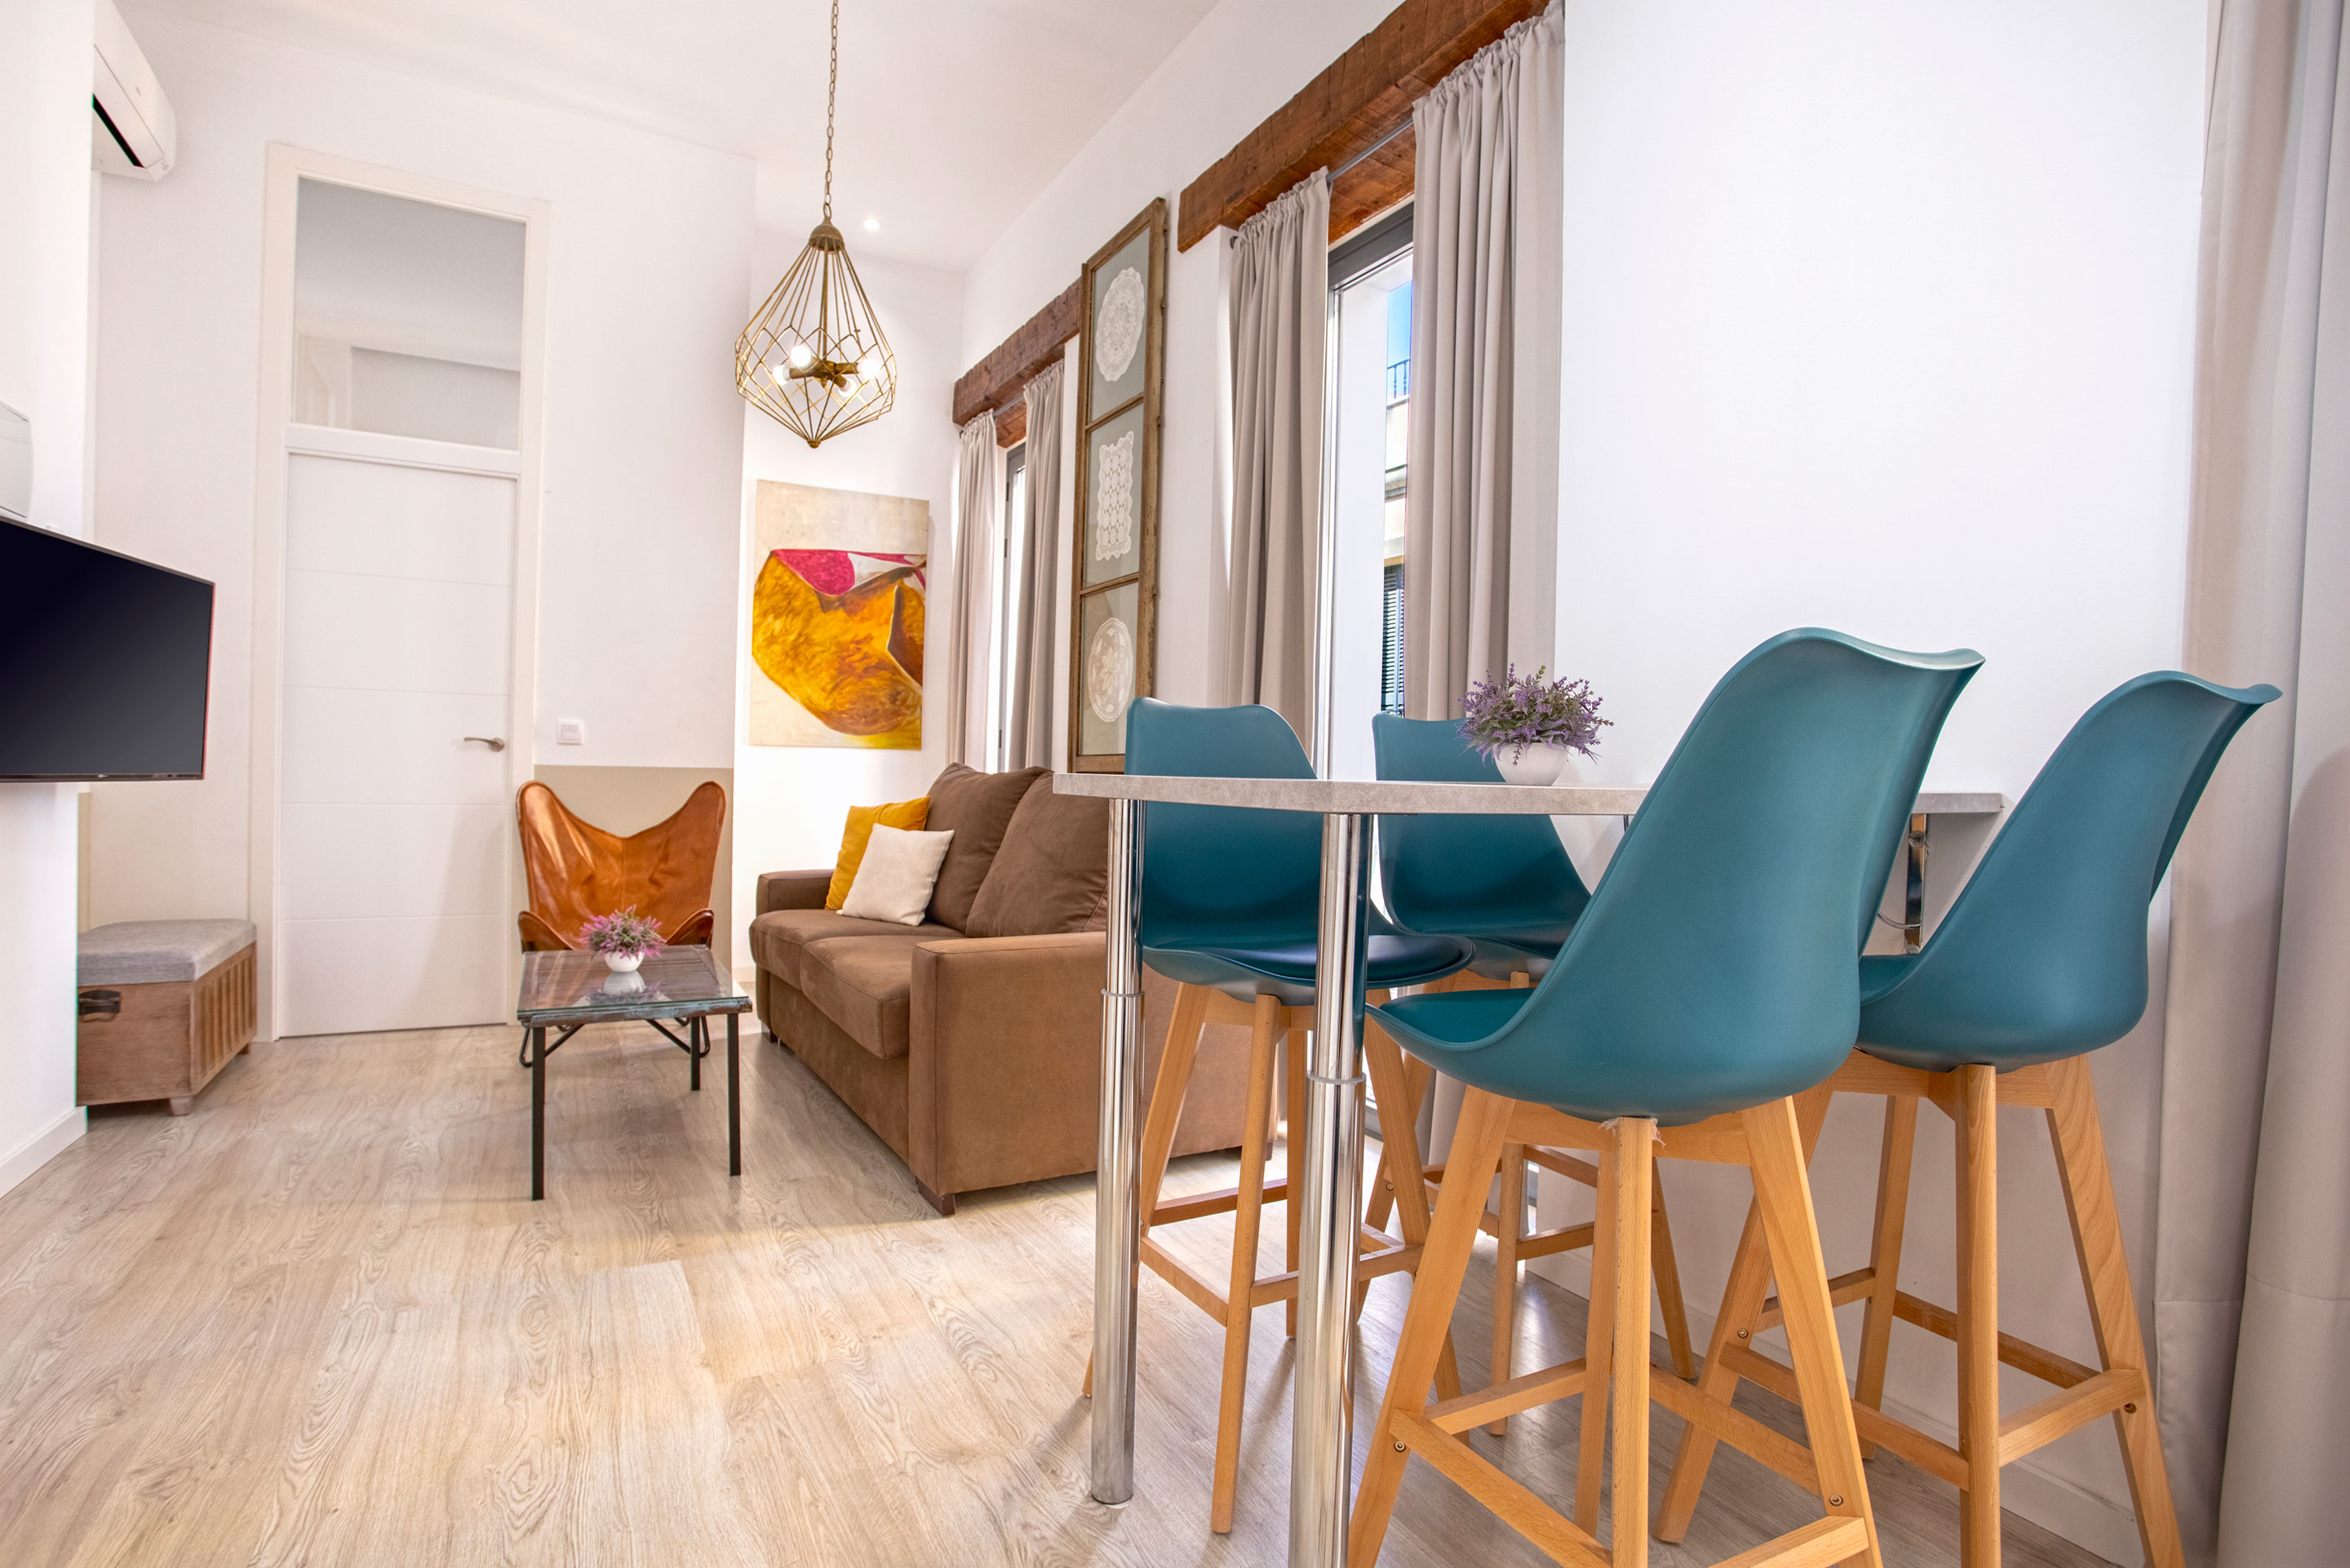 Property Image 1 - Cozy one bedroom apartment in the heart of Seville. Acanthus IV